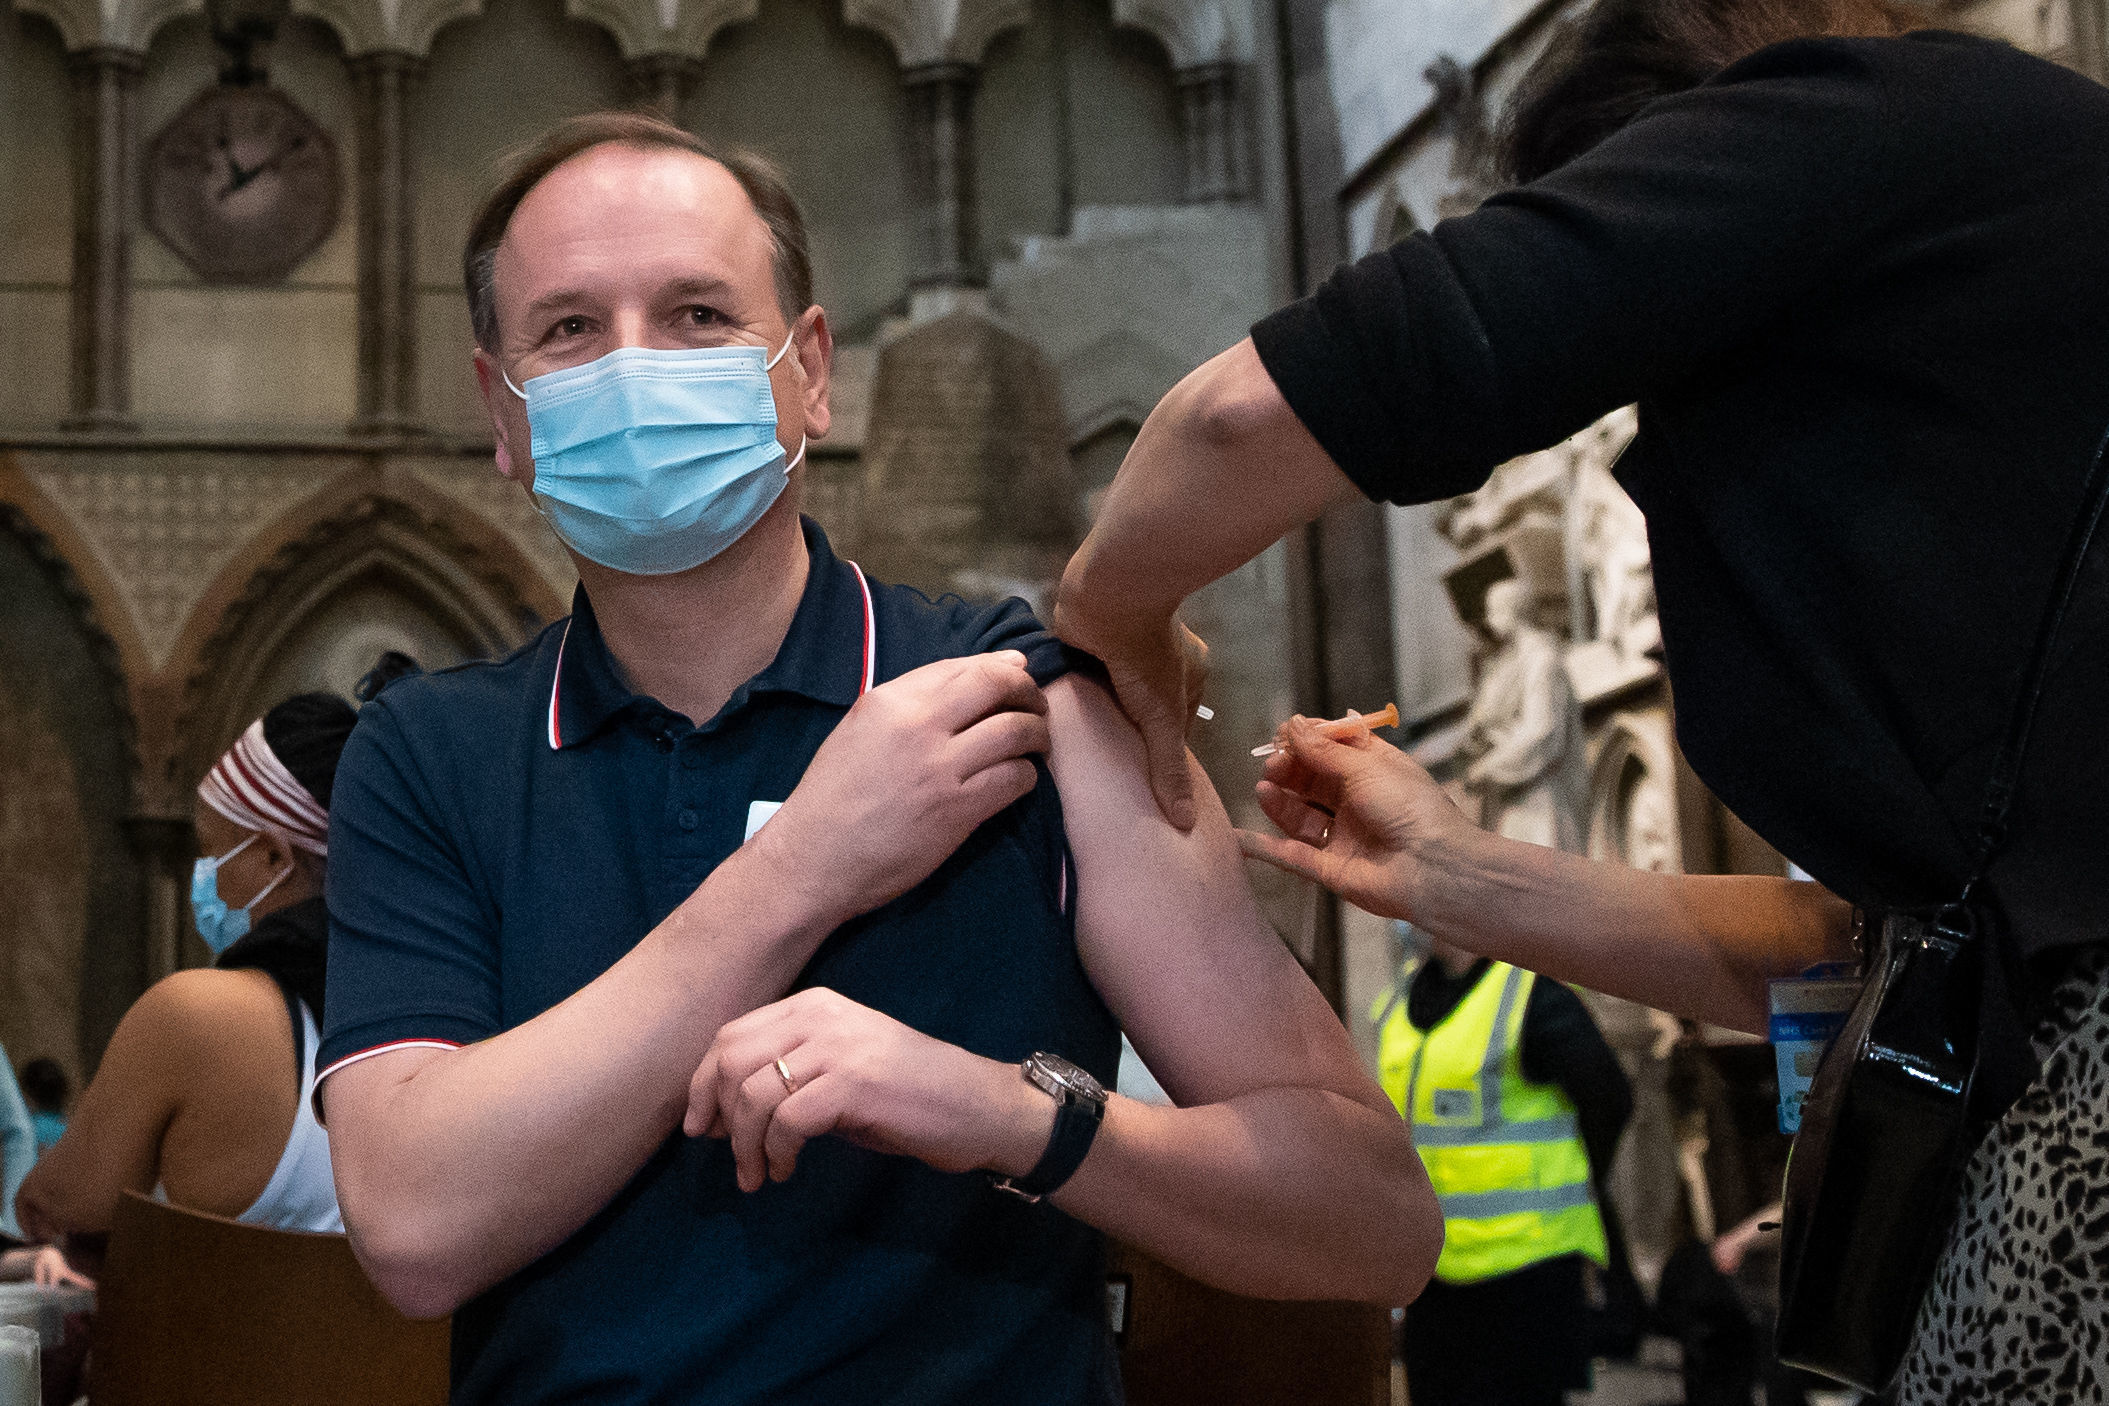 Dr Jan Maniera local GP and clinical director for south Westminster primary care network administers an injection of the Astra Zeneca coronavirus vaccine to Chief Executive of the National Health Service Sir Simon Stevens at Westminster Abbey, London.